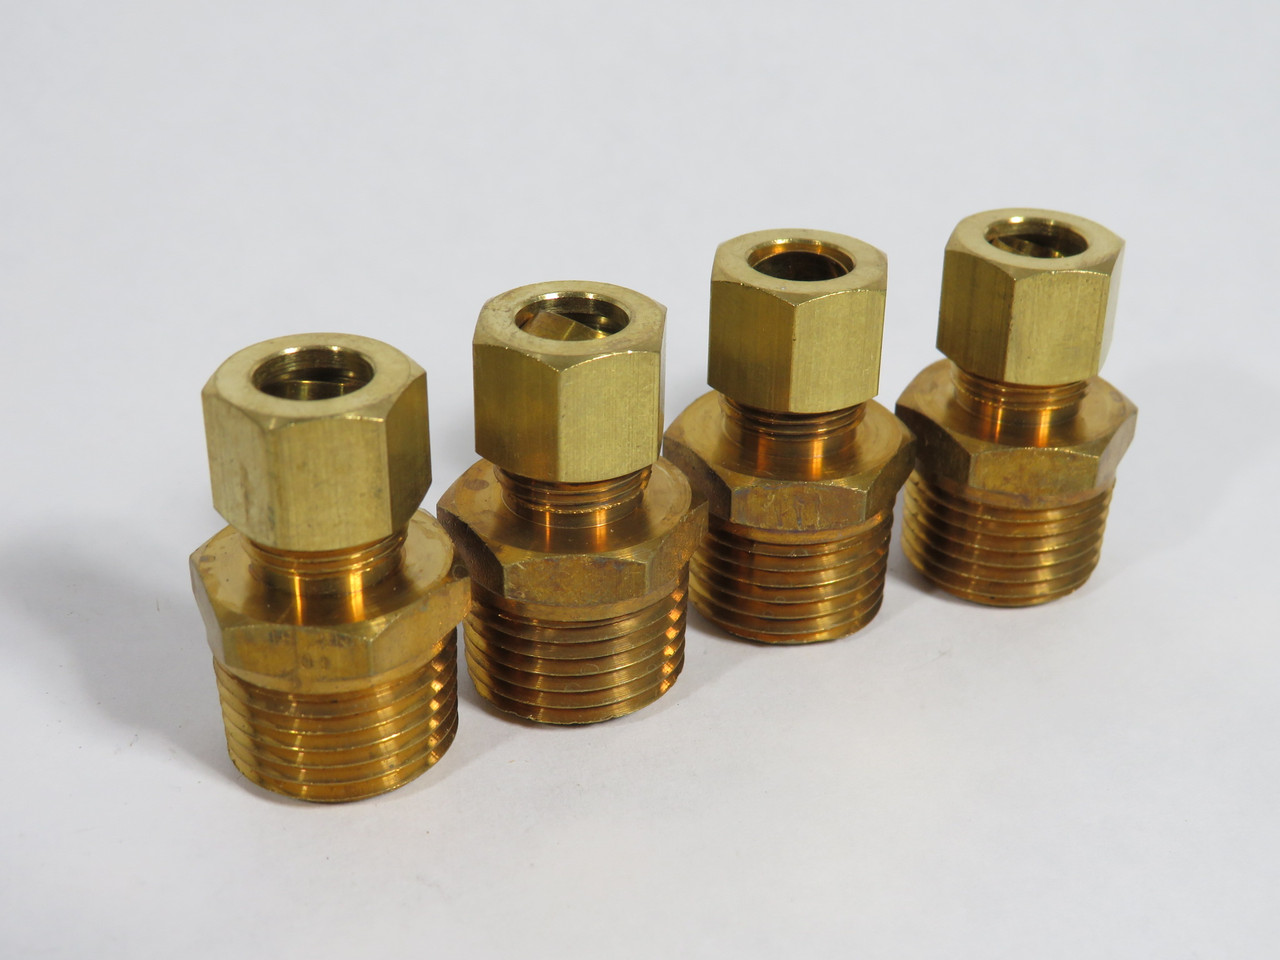 Generic Brass Compression Fitting NSF-61 1/2" Male NPT 3/8" Tube Lot of 4 USED